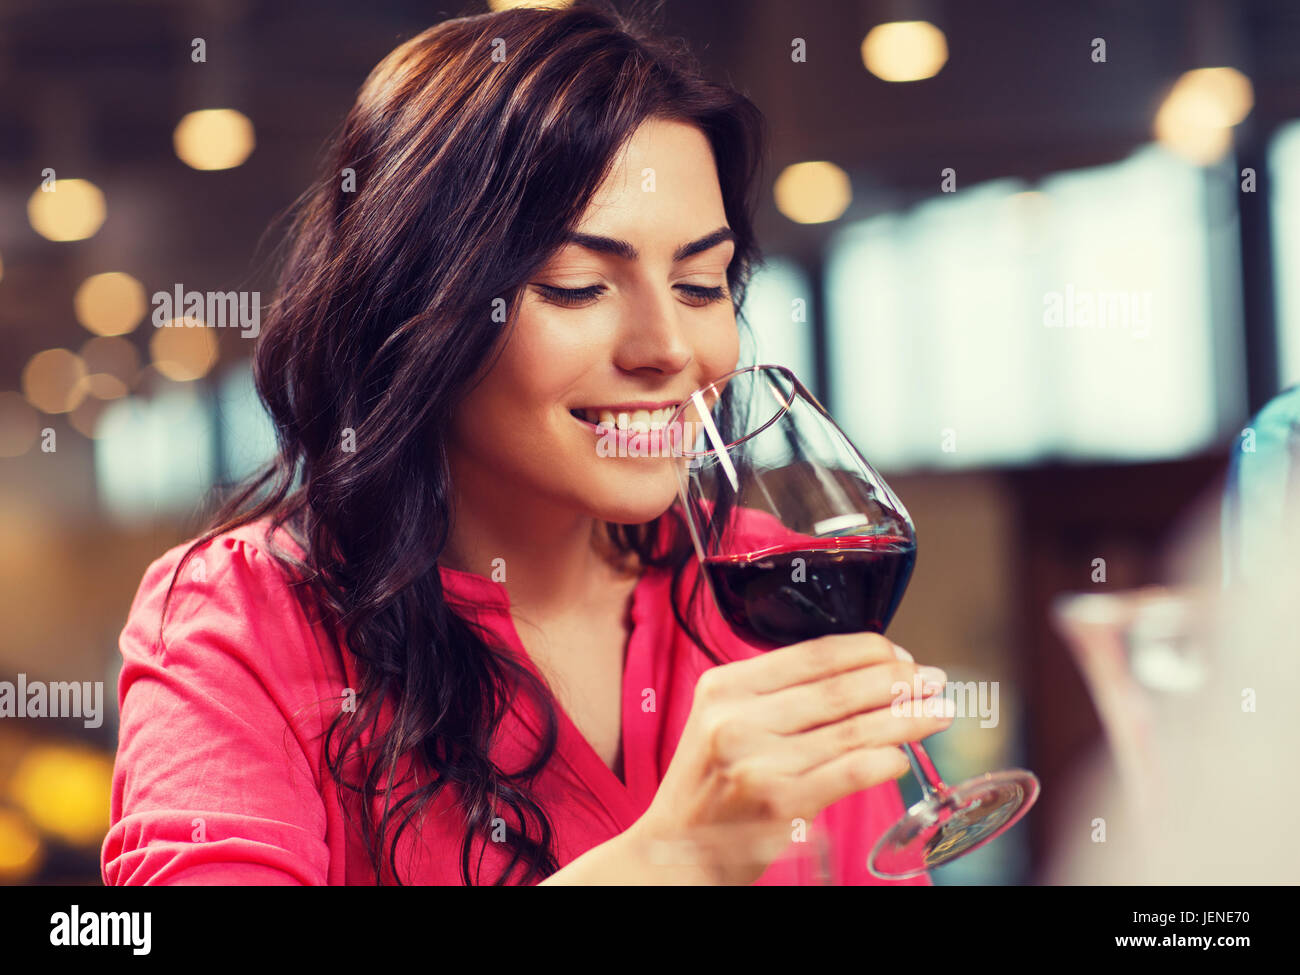 smiling woman drinking red wine at restaurant Stock Photo